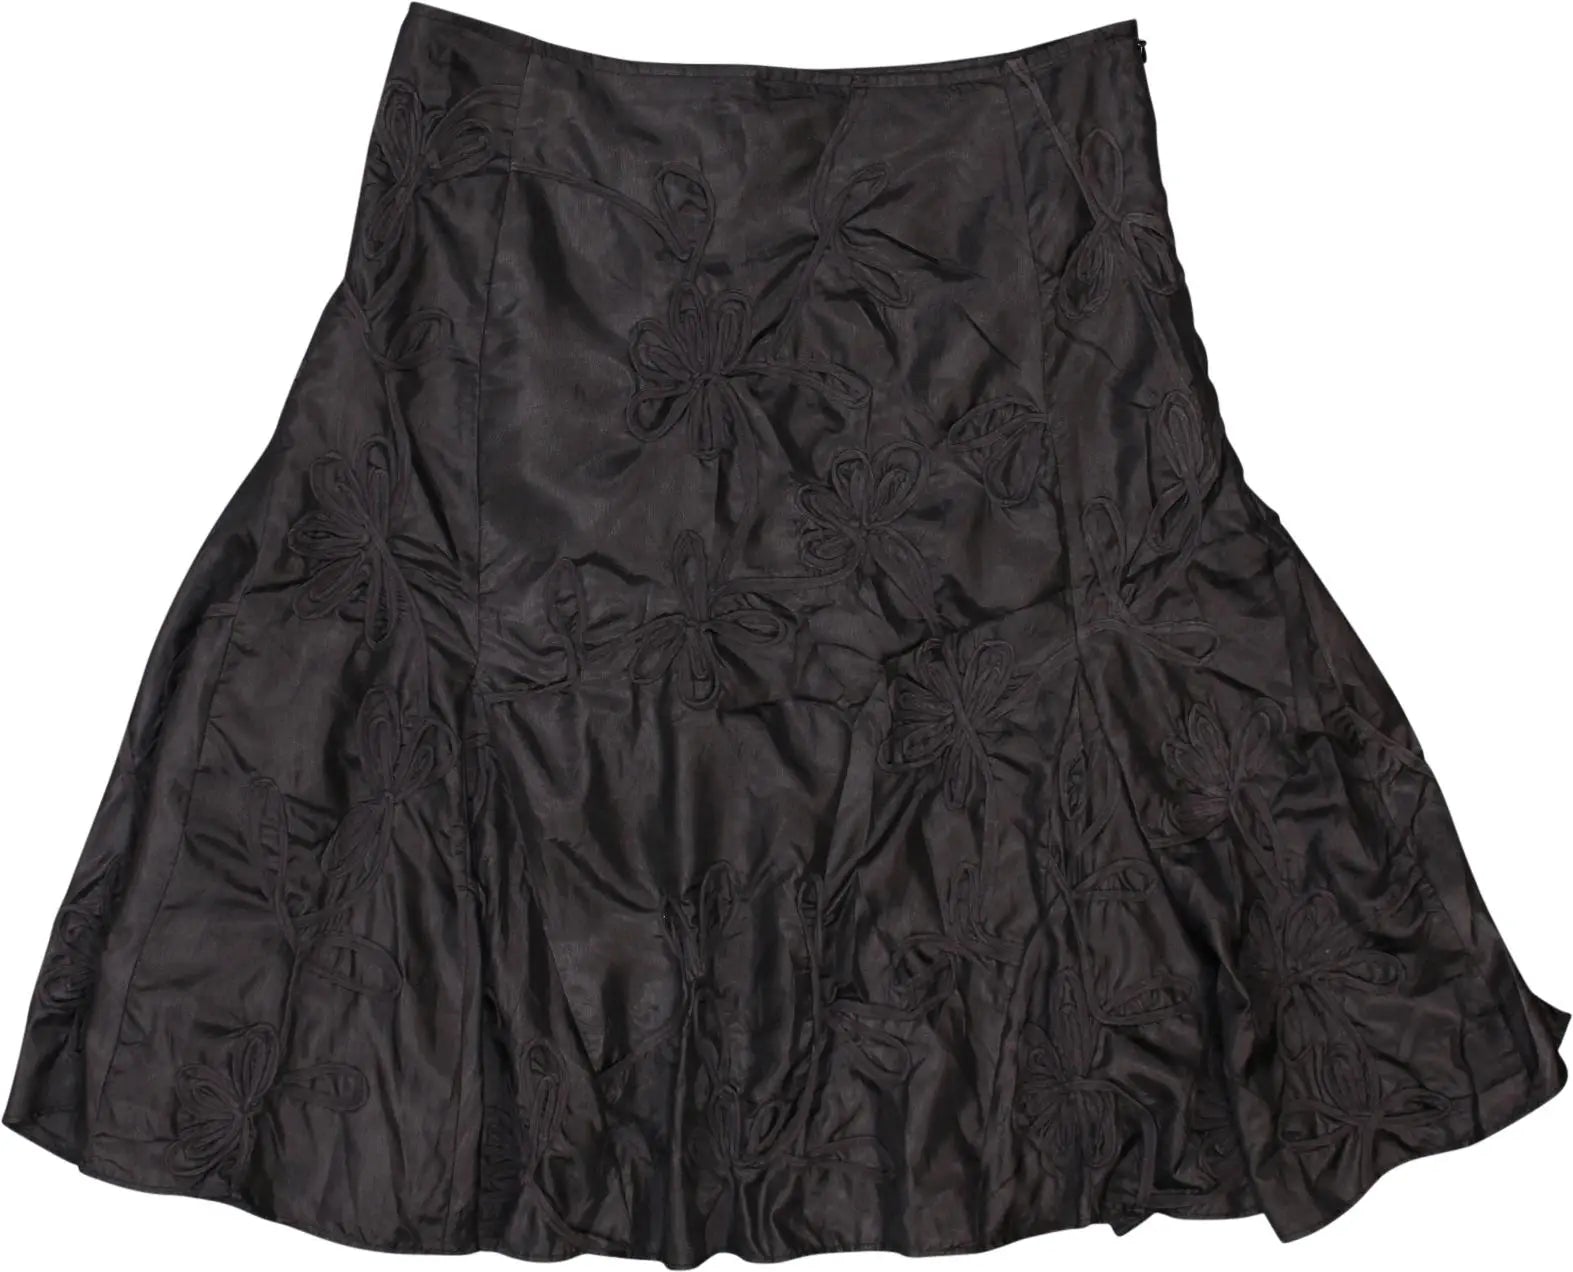 Unknown - Skirt- ThriftTale.com - Vintage and second handclothing